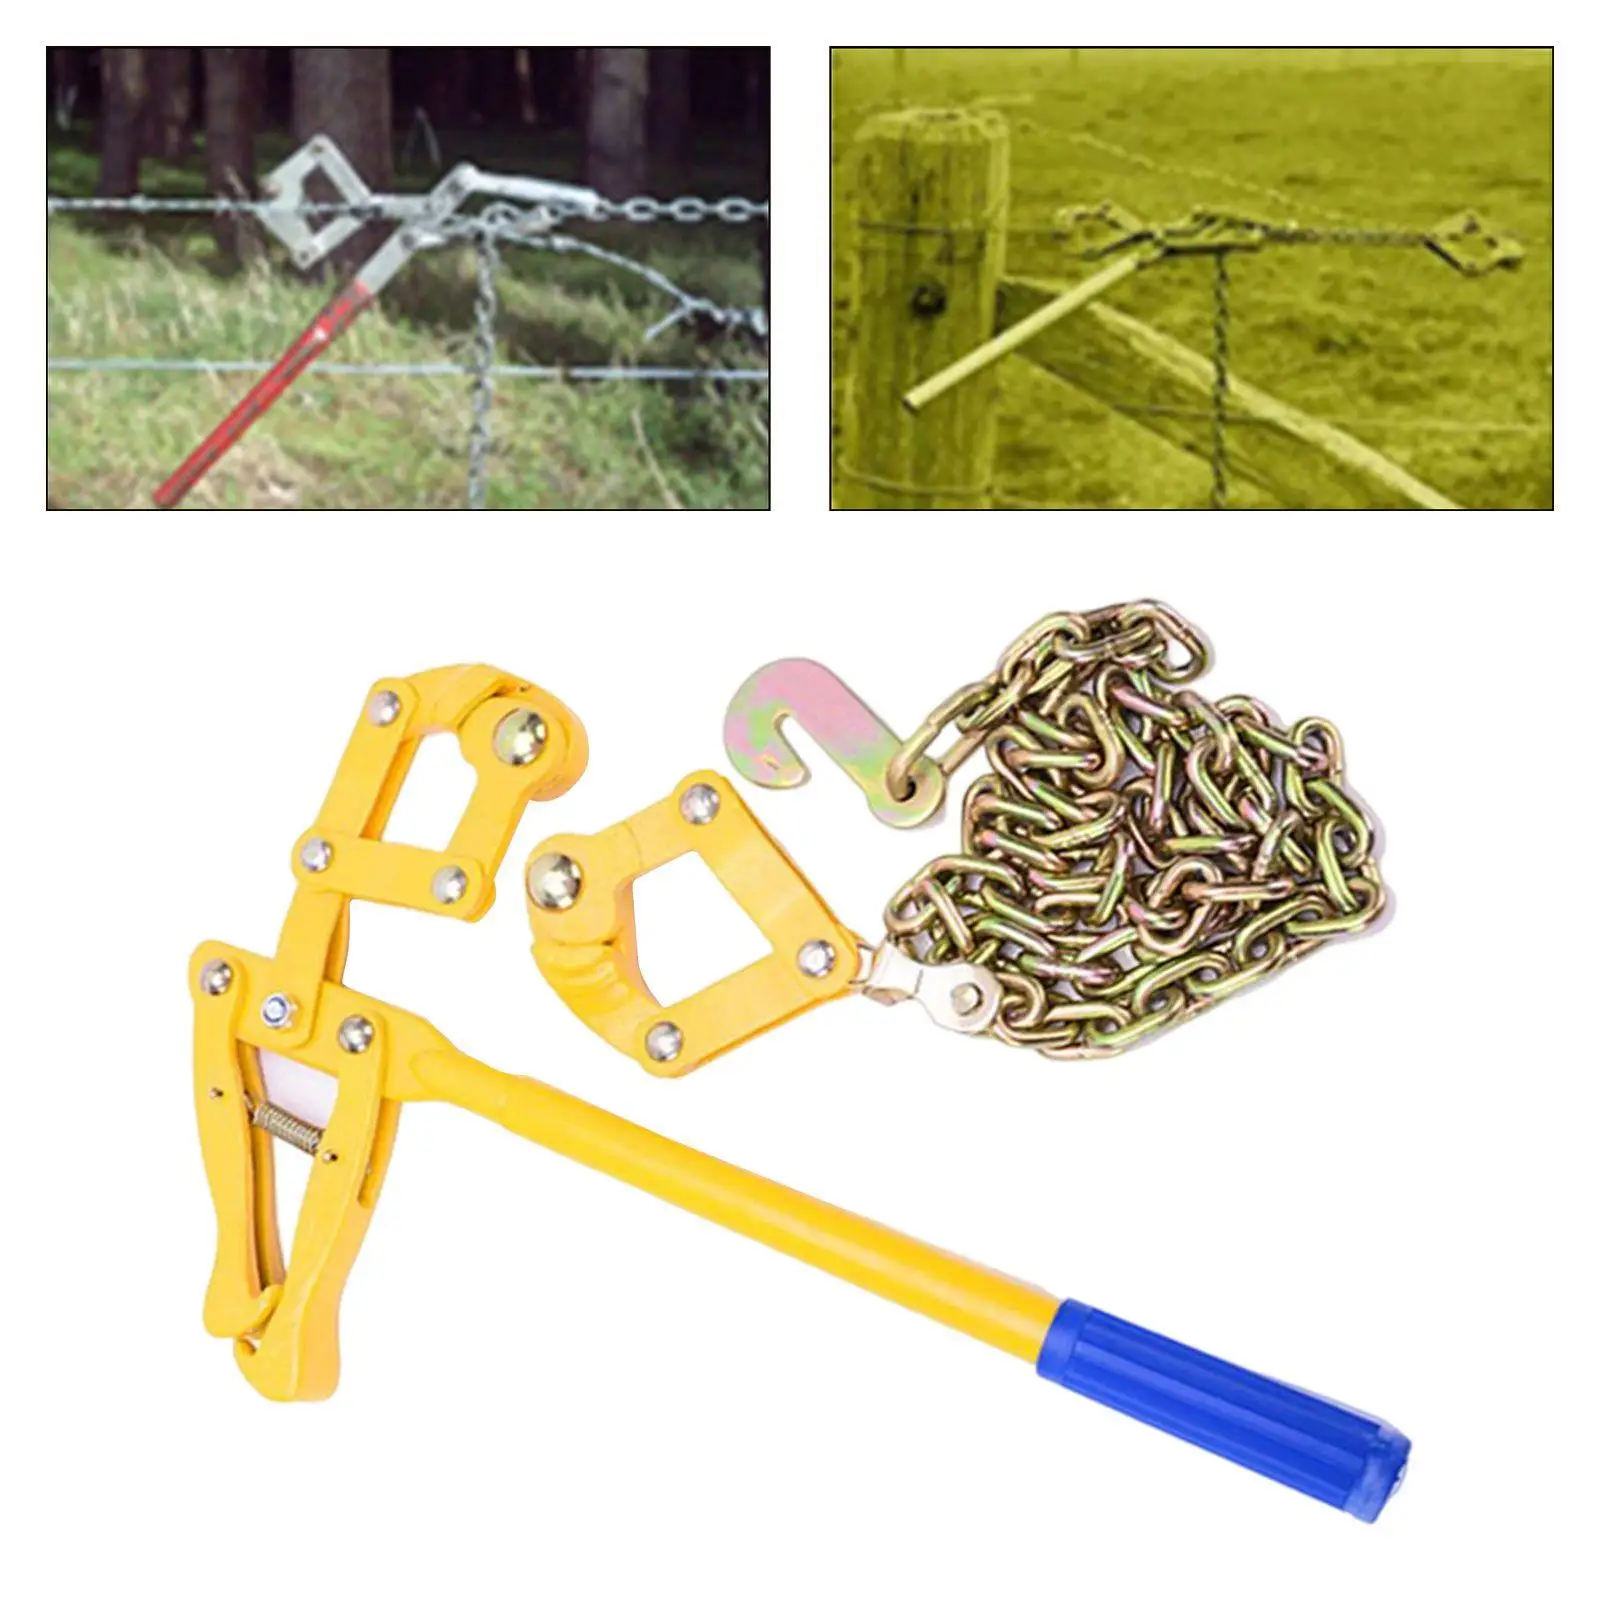 Chain Fence Strainer Electric Fence Repair Tool with 1.2M Chain Fence Plain Barbed Wire Strainer for Farm Fencing